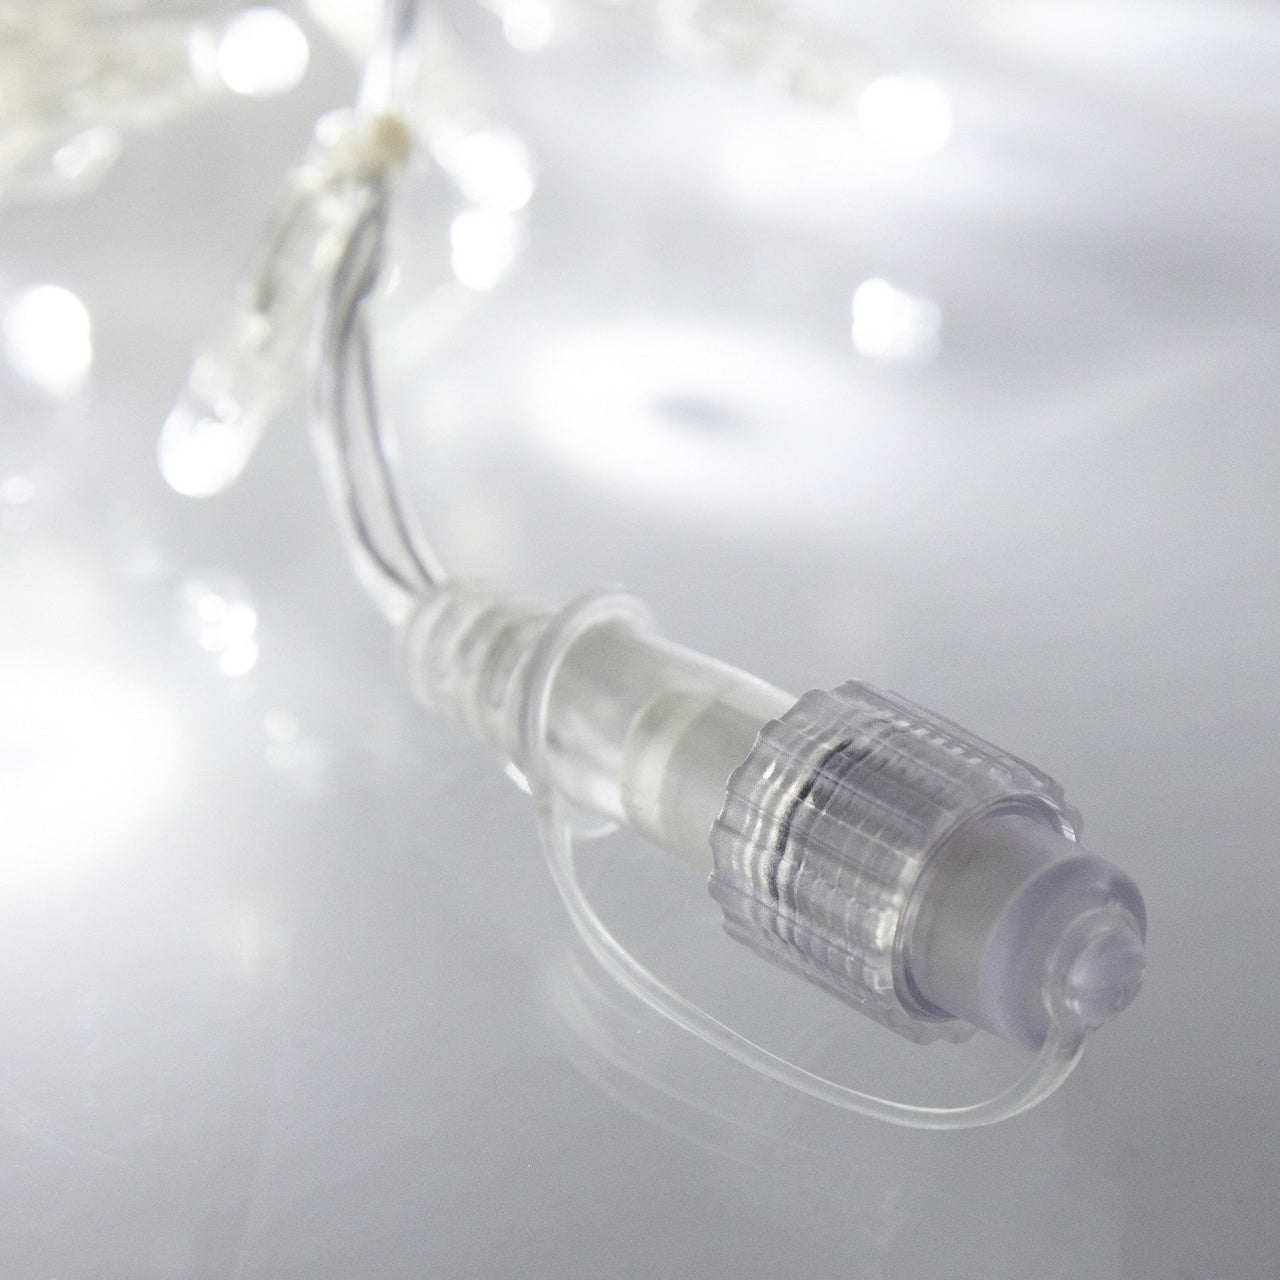 Core Connect 6m x 2m 420 White Connectable Net Lights Clear Cable